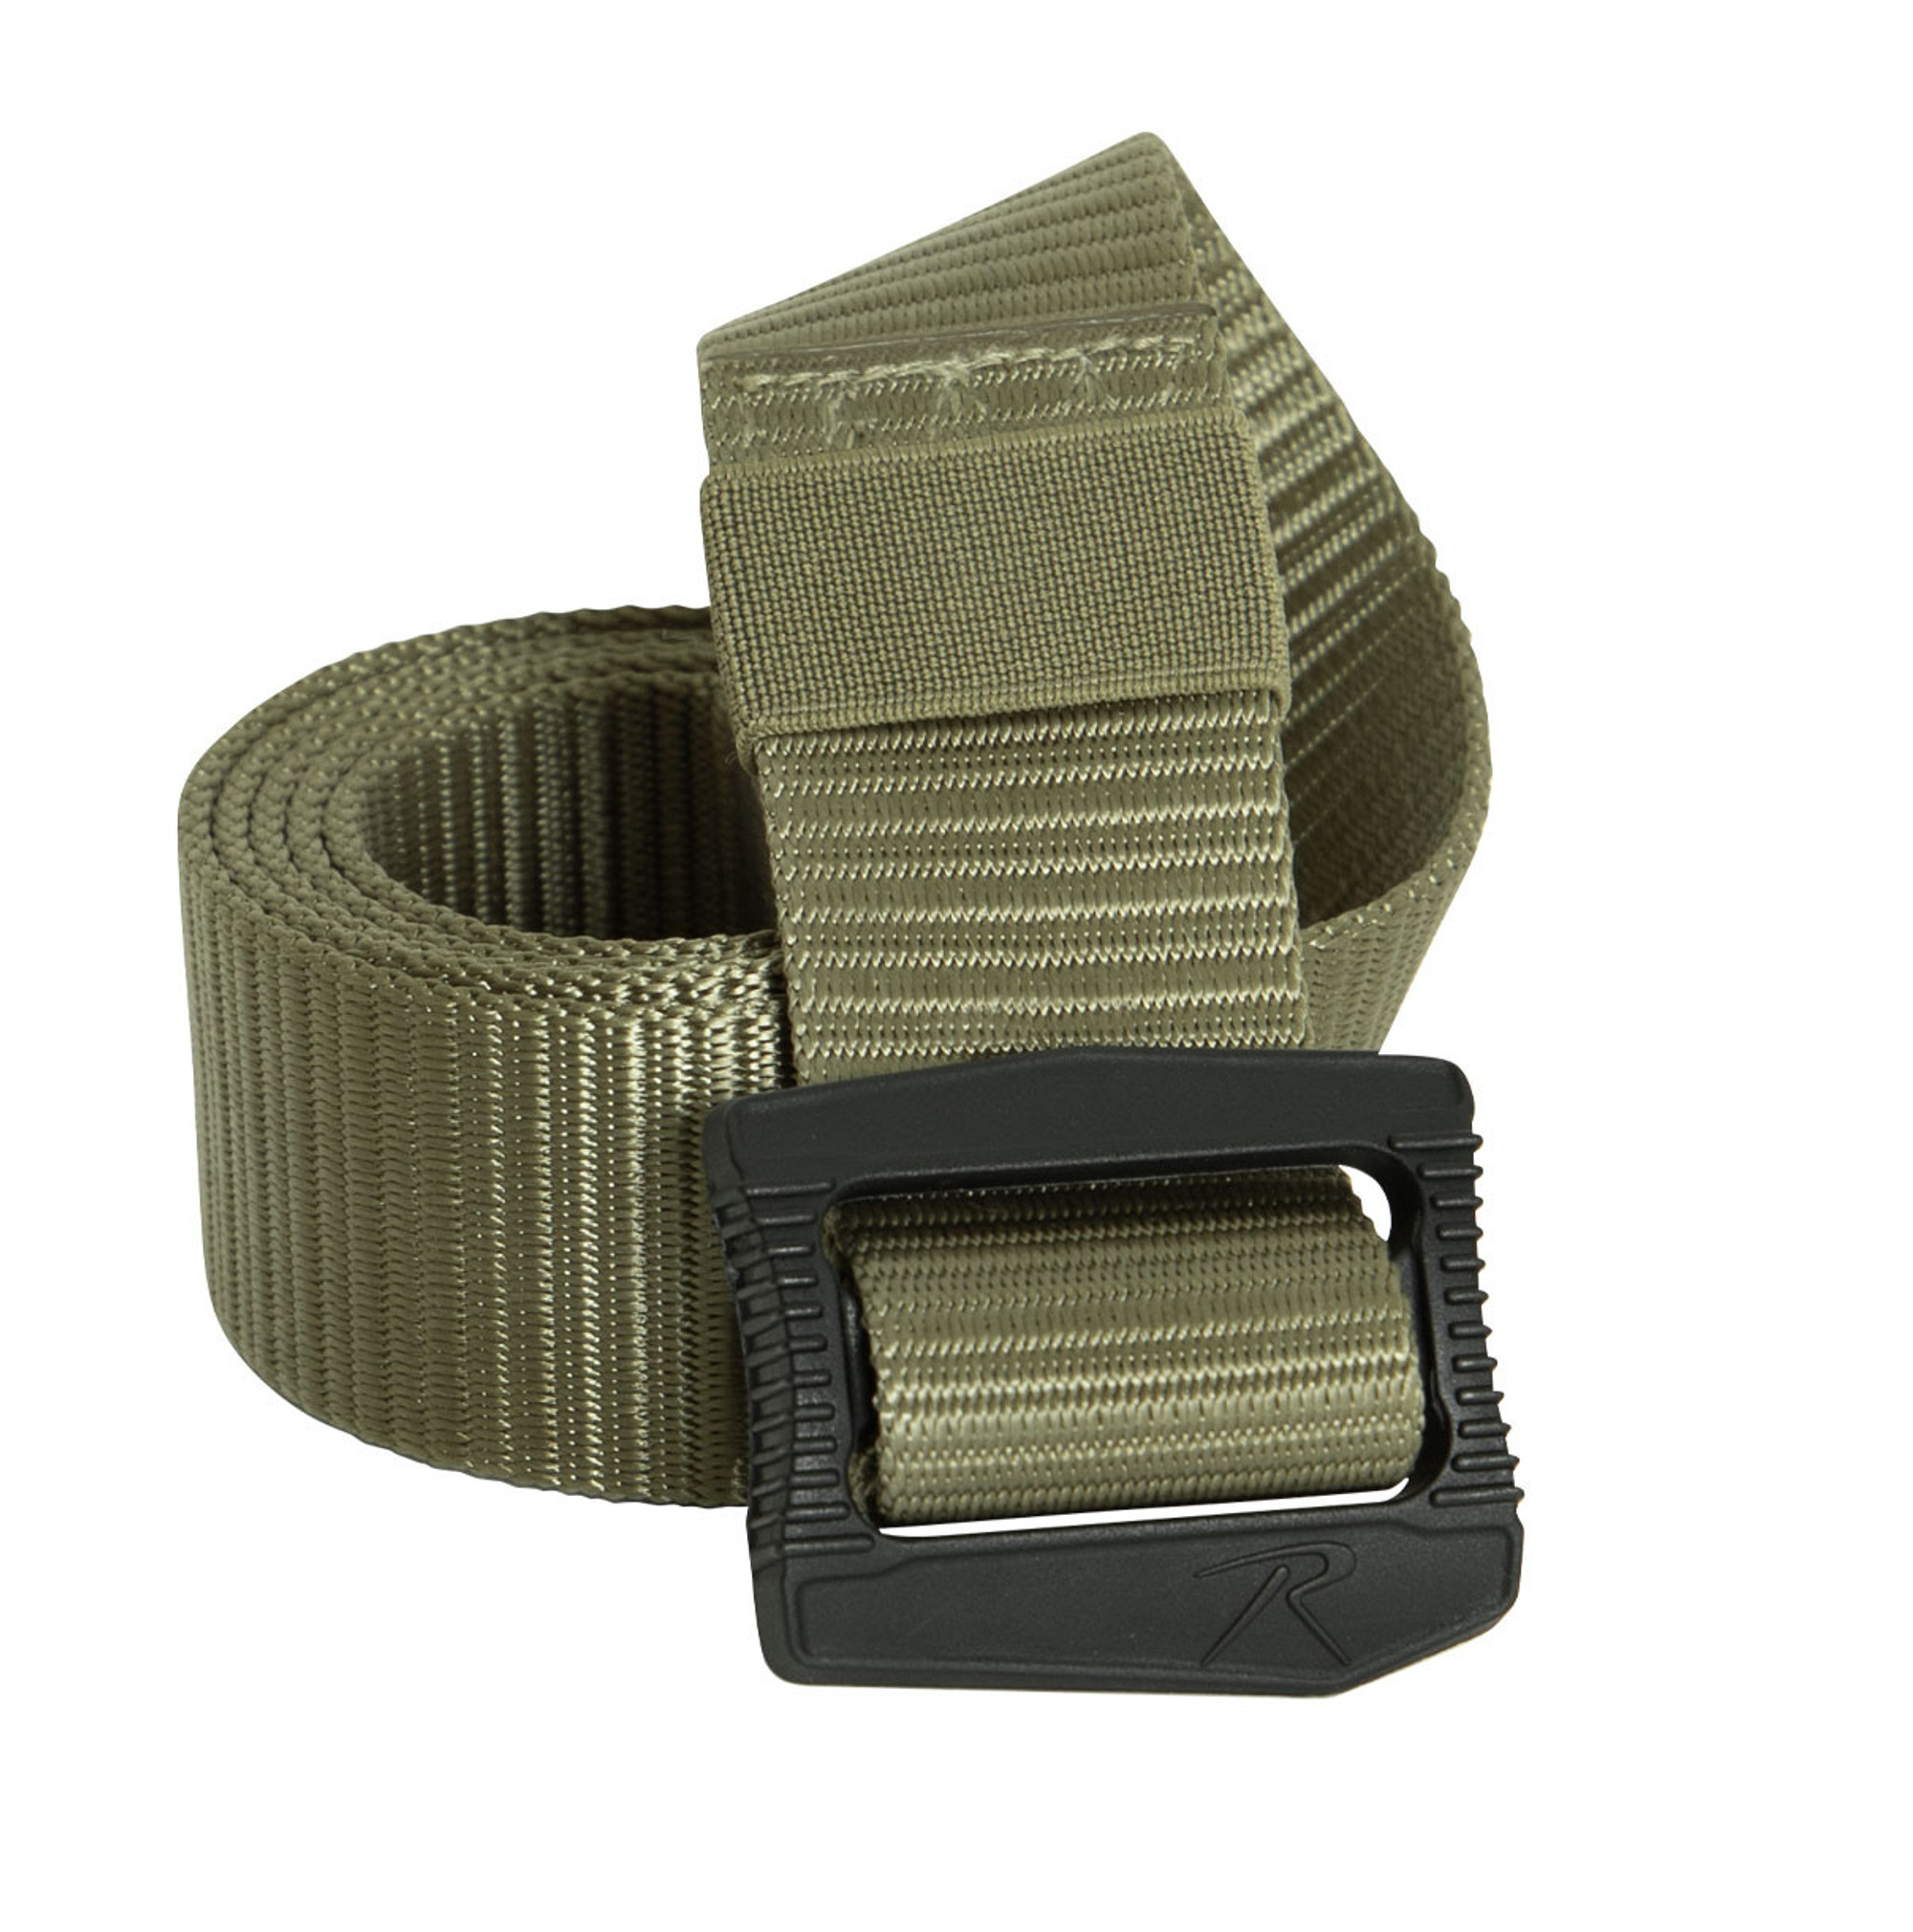 Rothco Deluxe BDU Belt With Security Friendly Plastic Buckle - Coyote Brown